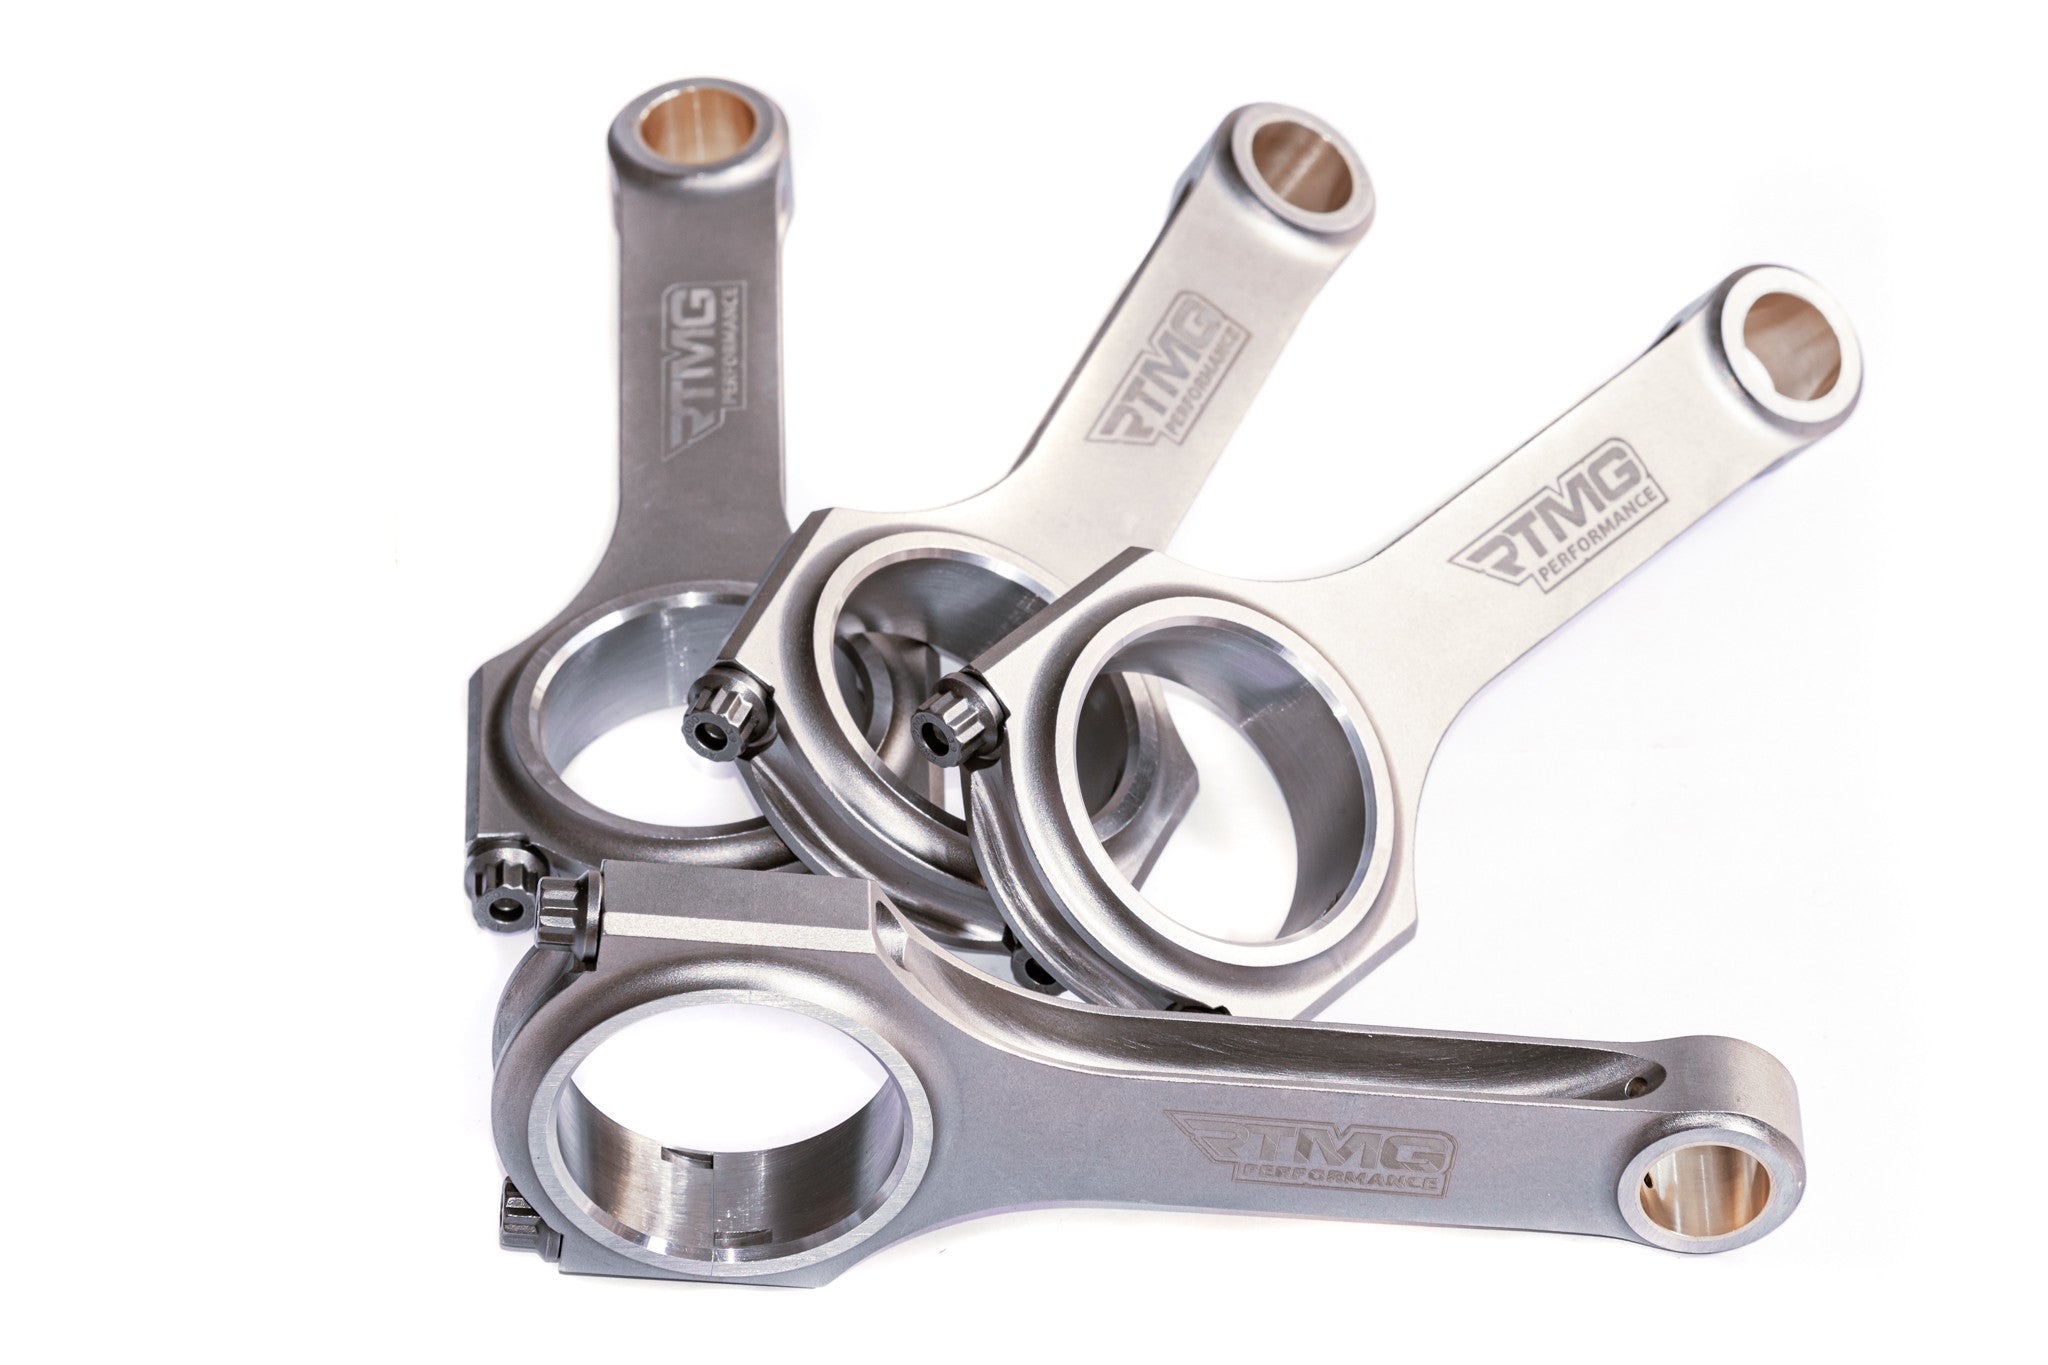 Connecting Rods Set for 1.4 TSI EA211 - Up to 600HP - RTMG Performance